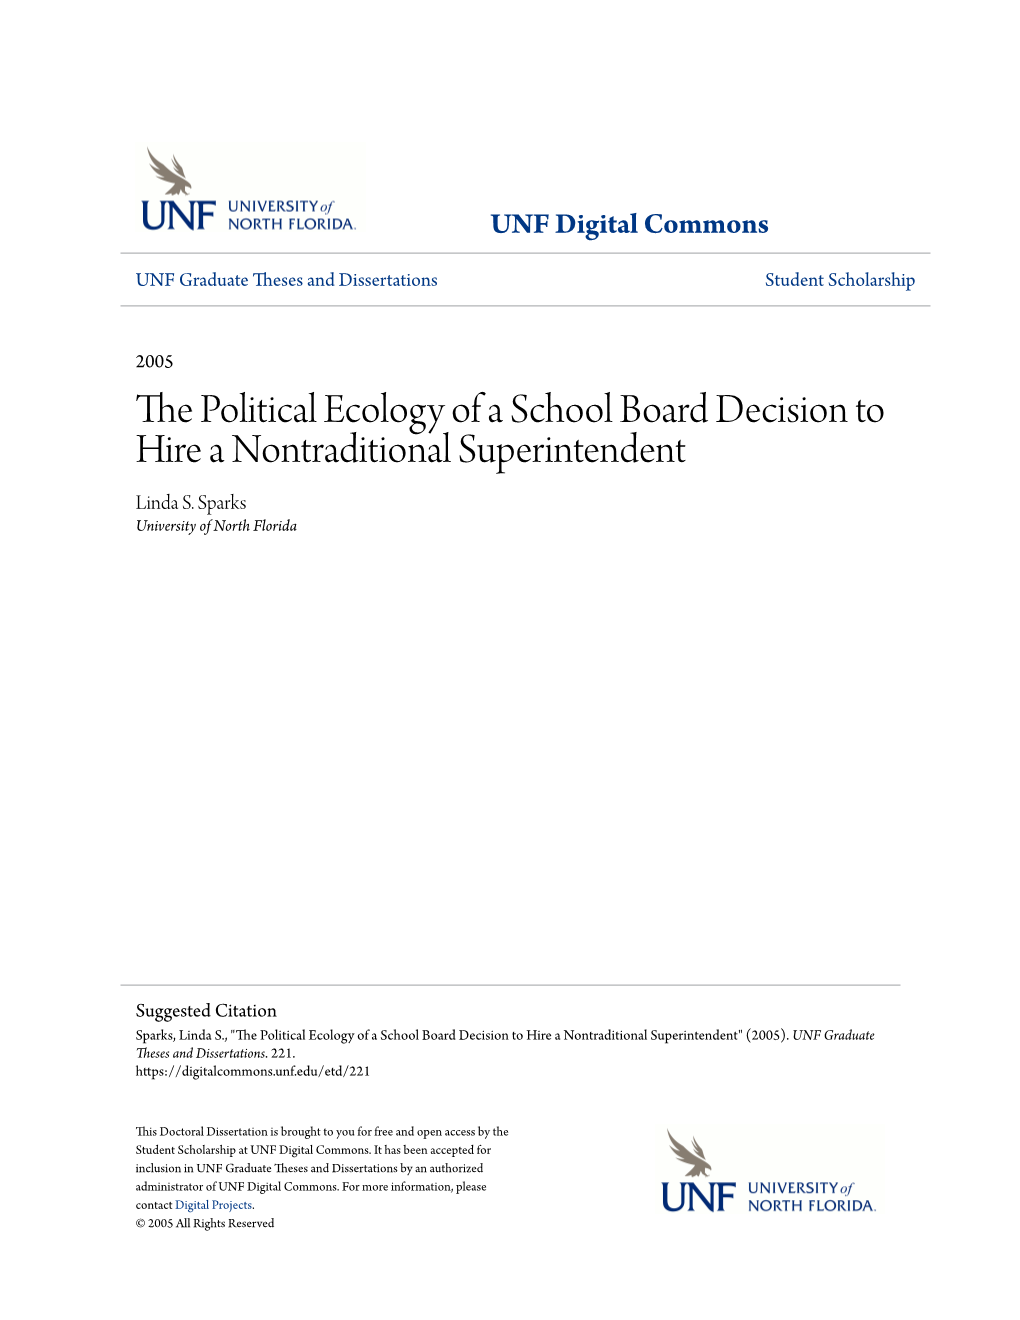 The Political Ecology of a School Board Decision to Hire a Nontraditional Superintendent